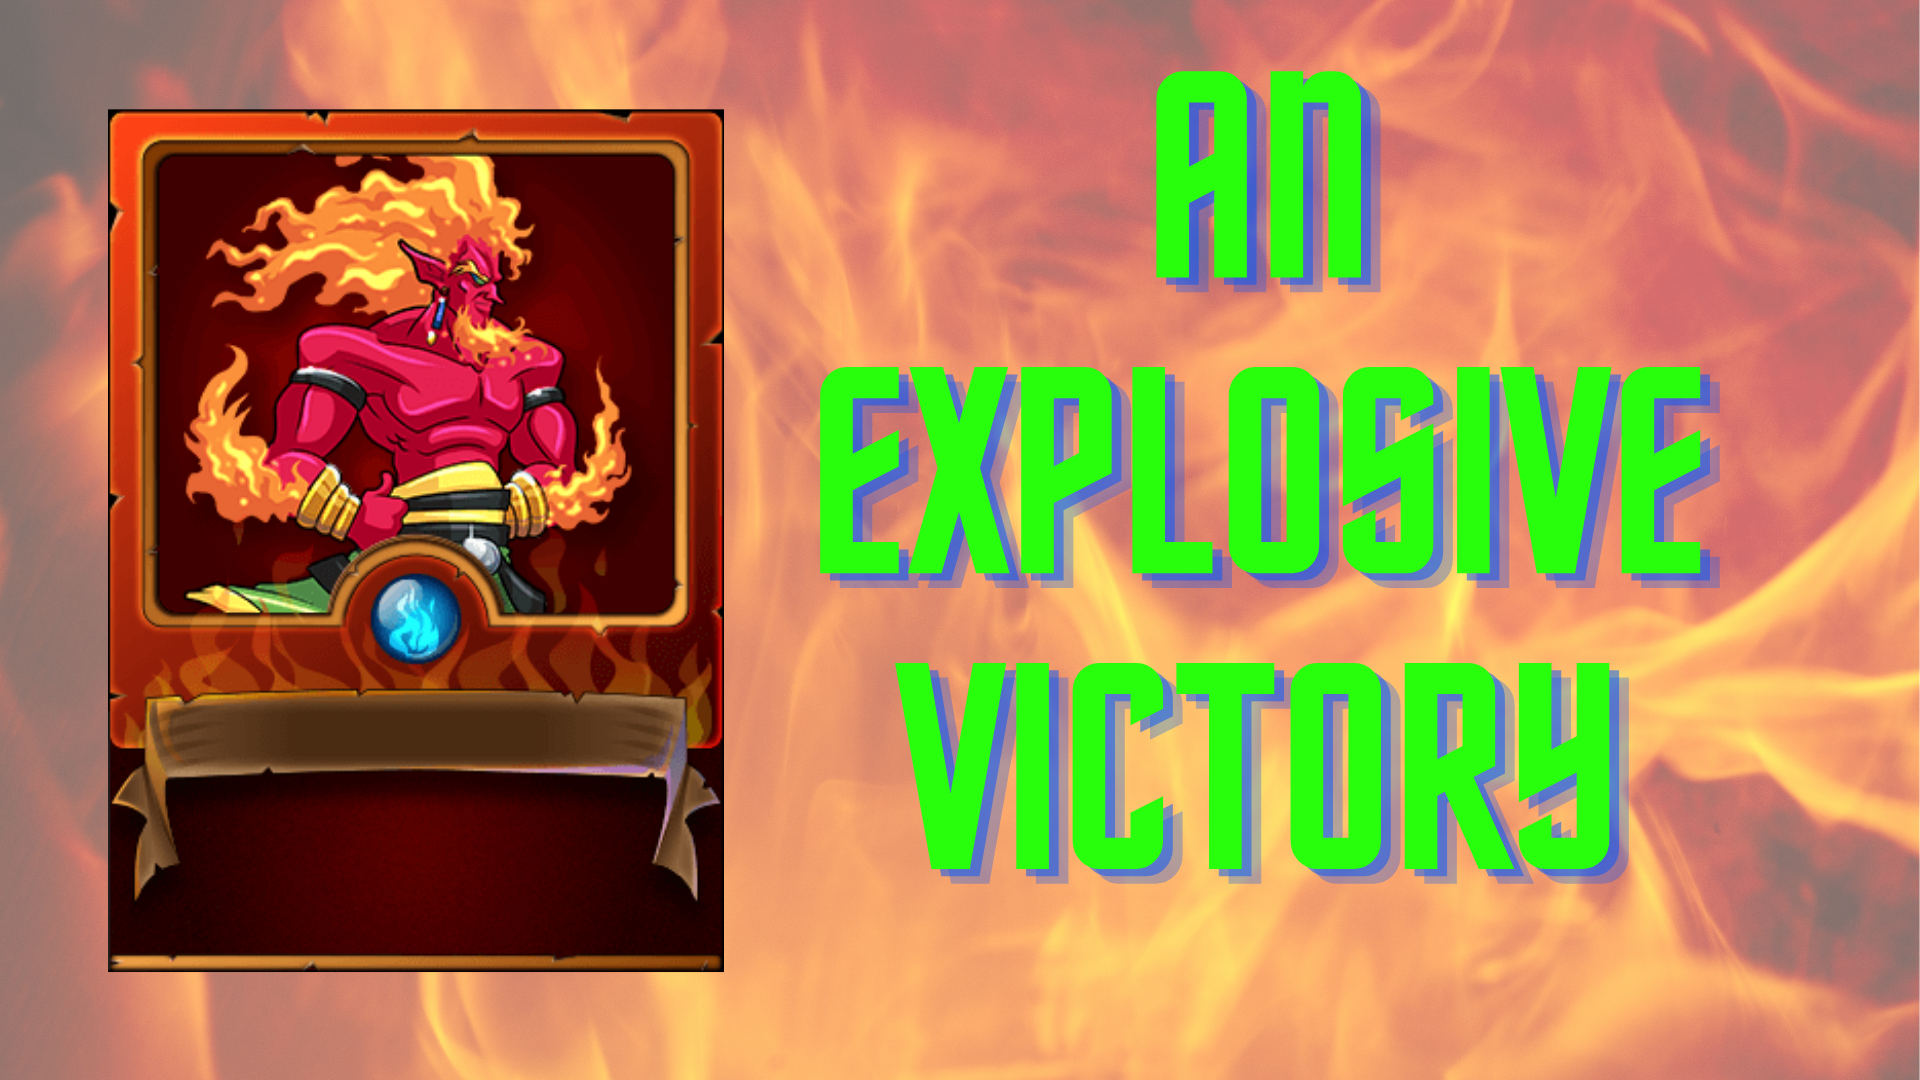 An explosive victory.png